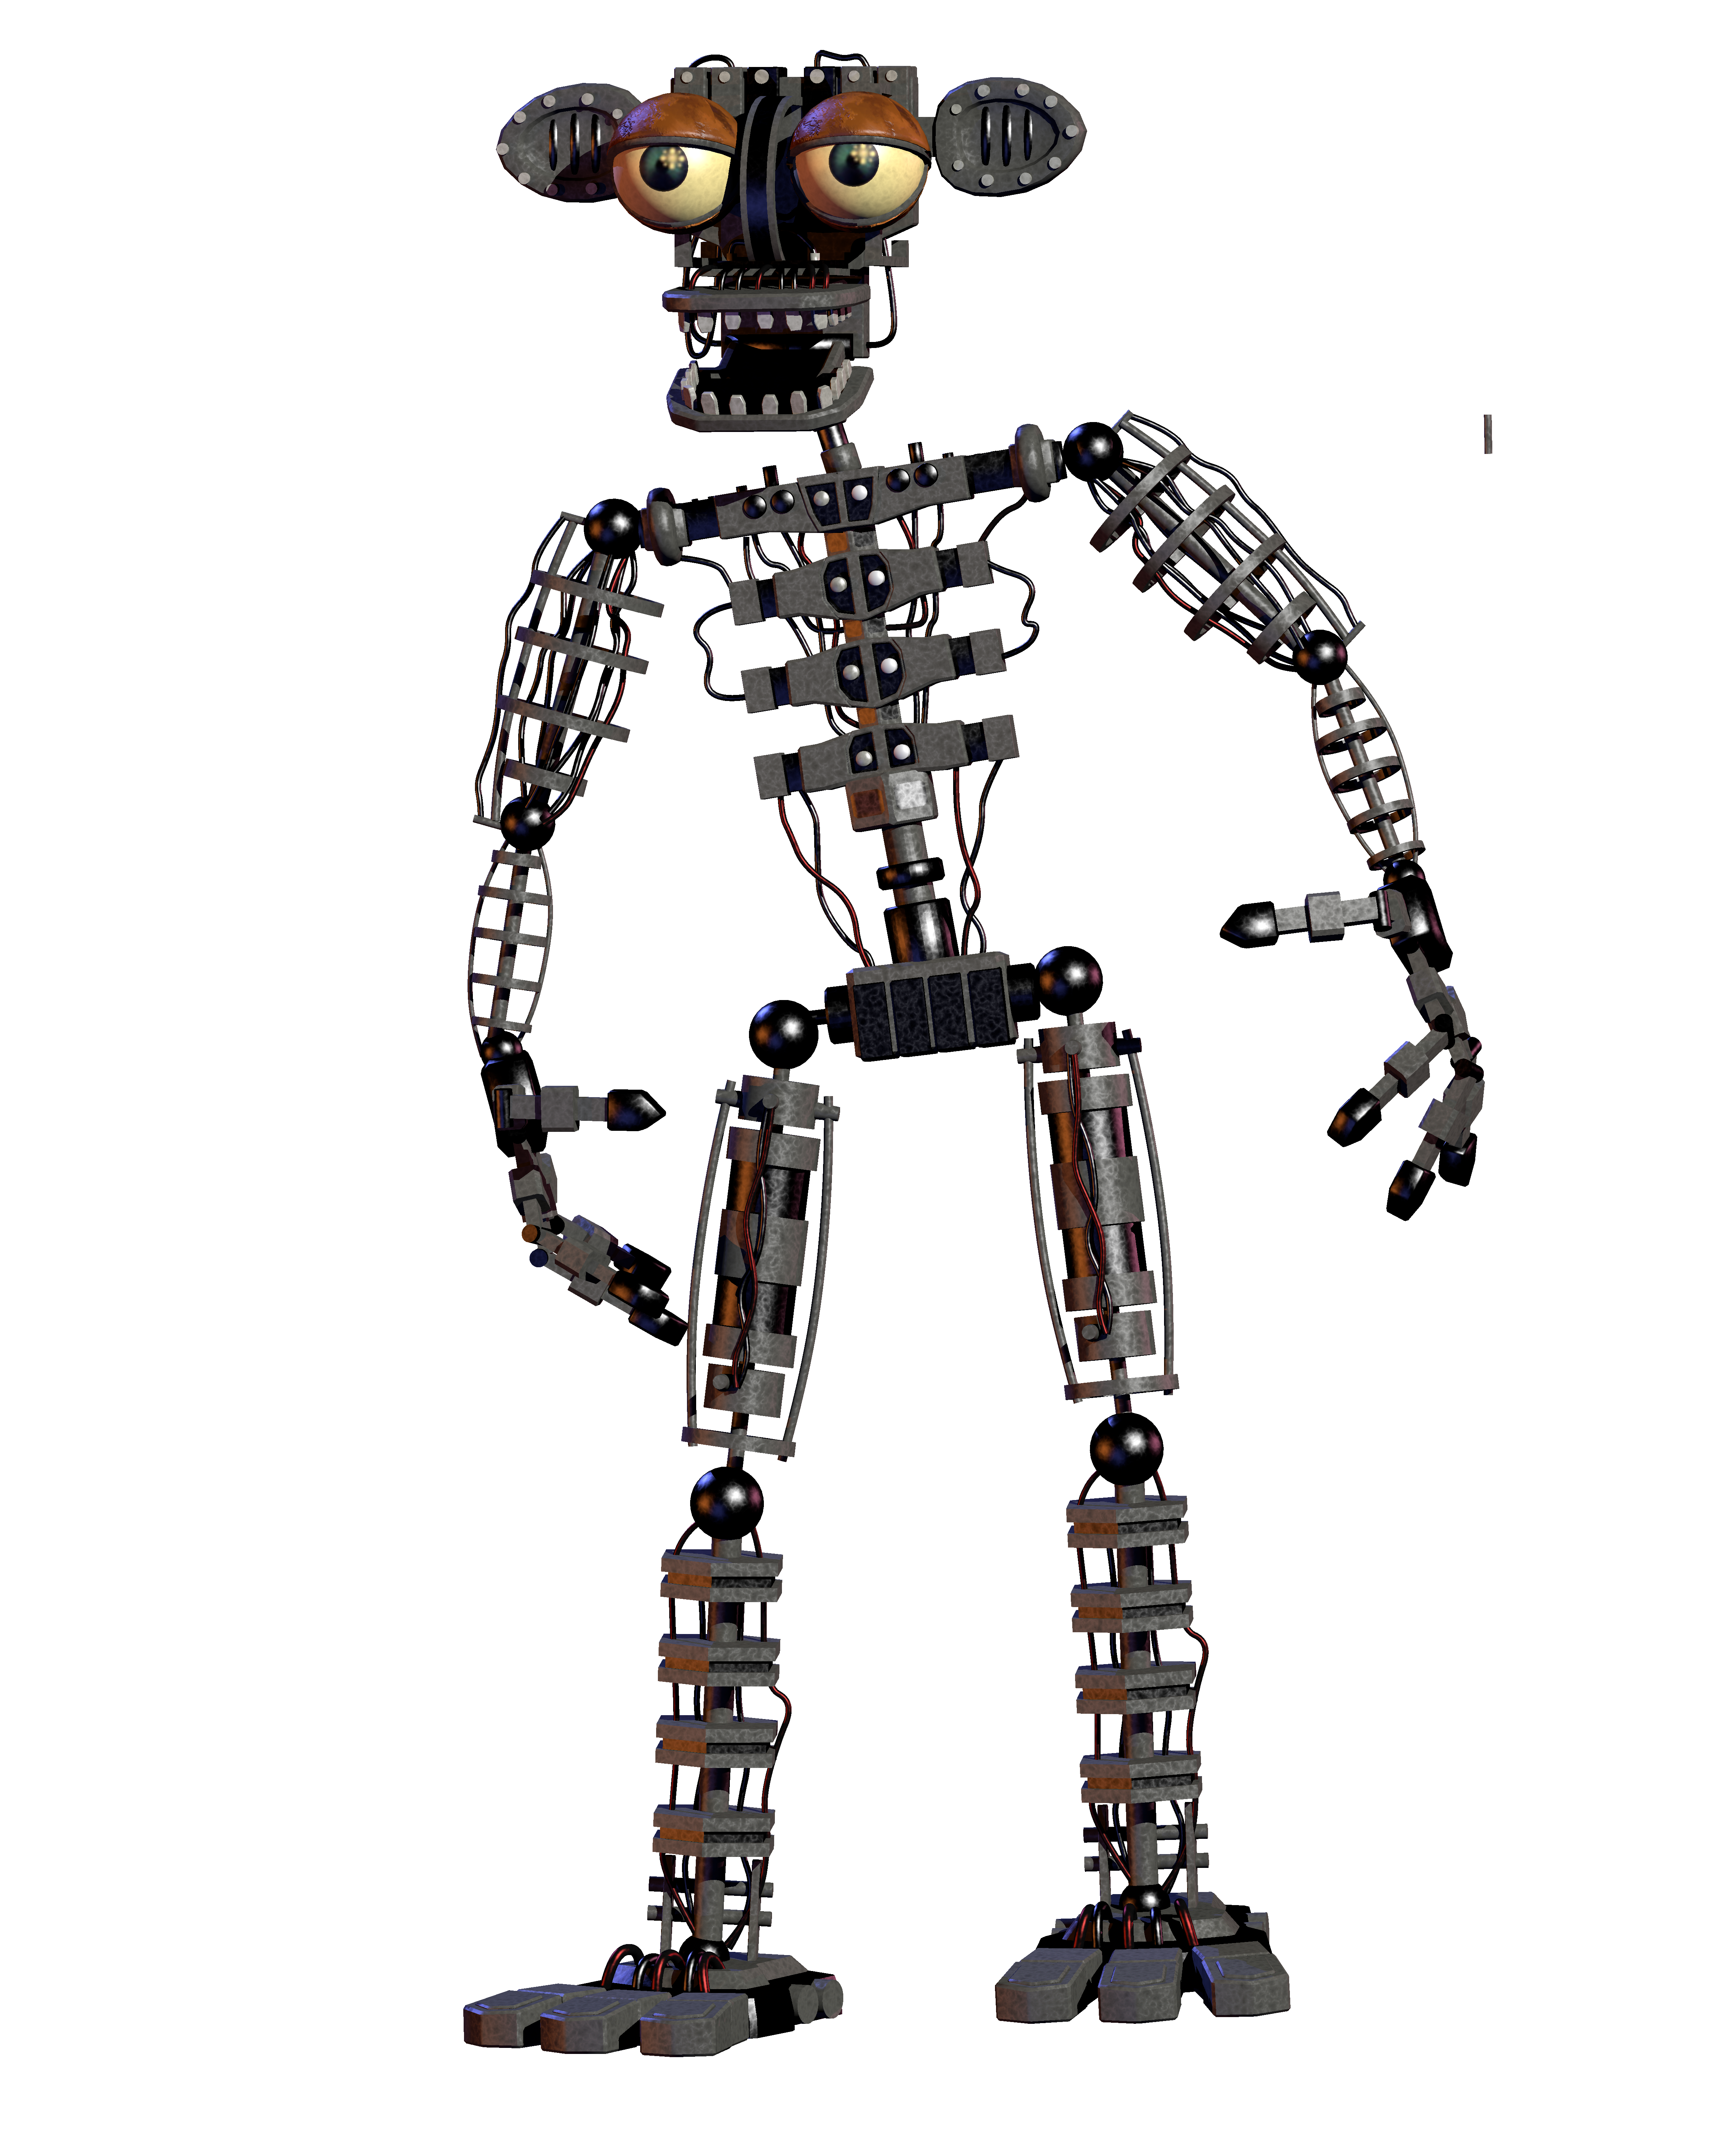 Endoesqueleto Fnaf Wiki Five Nights At Freddys Pt My Xxx Hot Girl